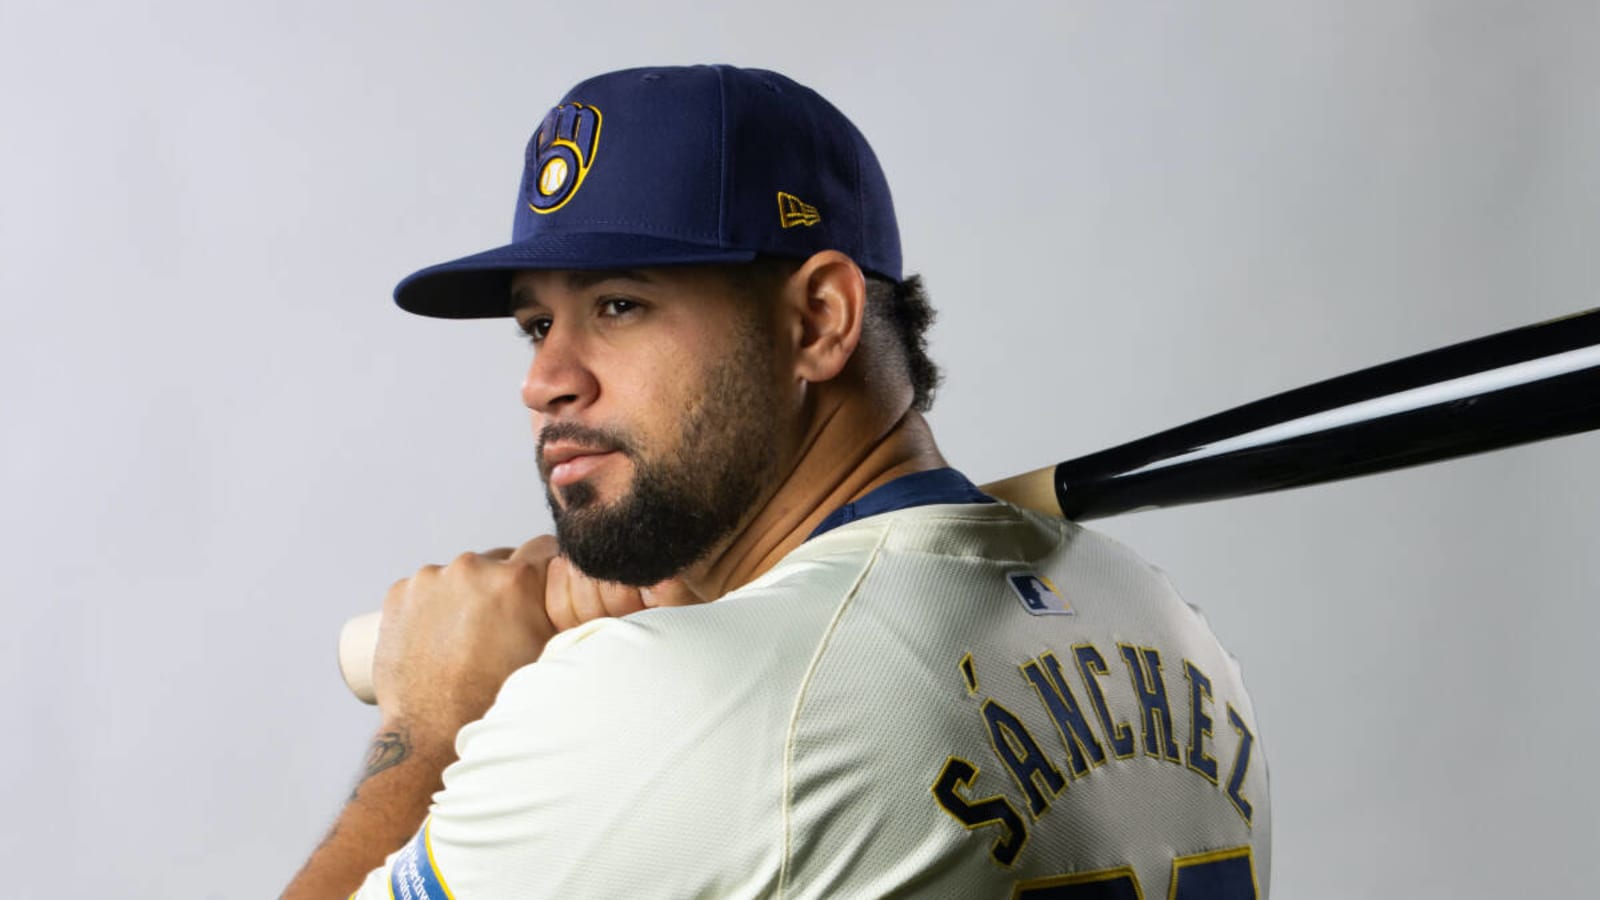 Milwaukee Brewers Catcher Apparently Recovering Ahead of Schedule, Per Manager